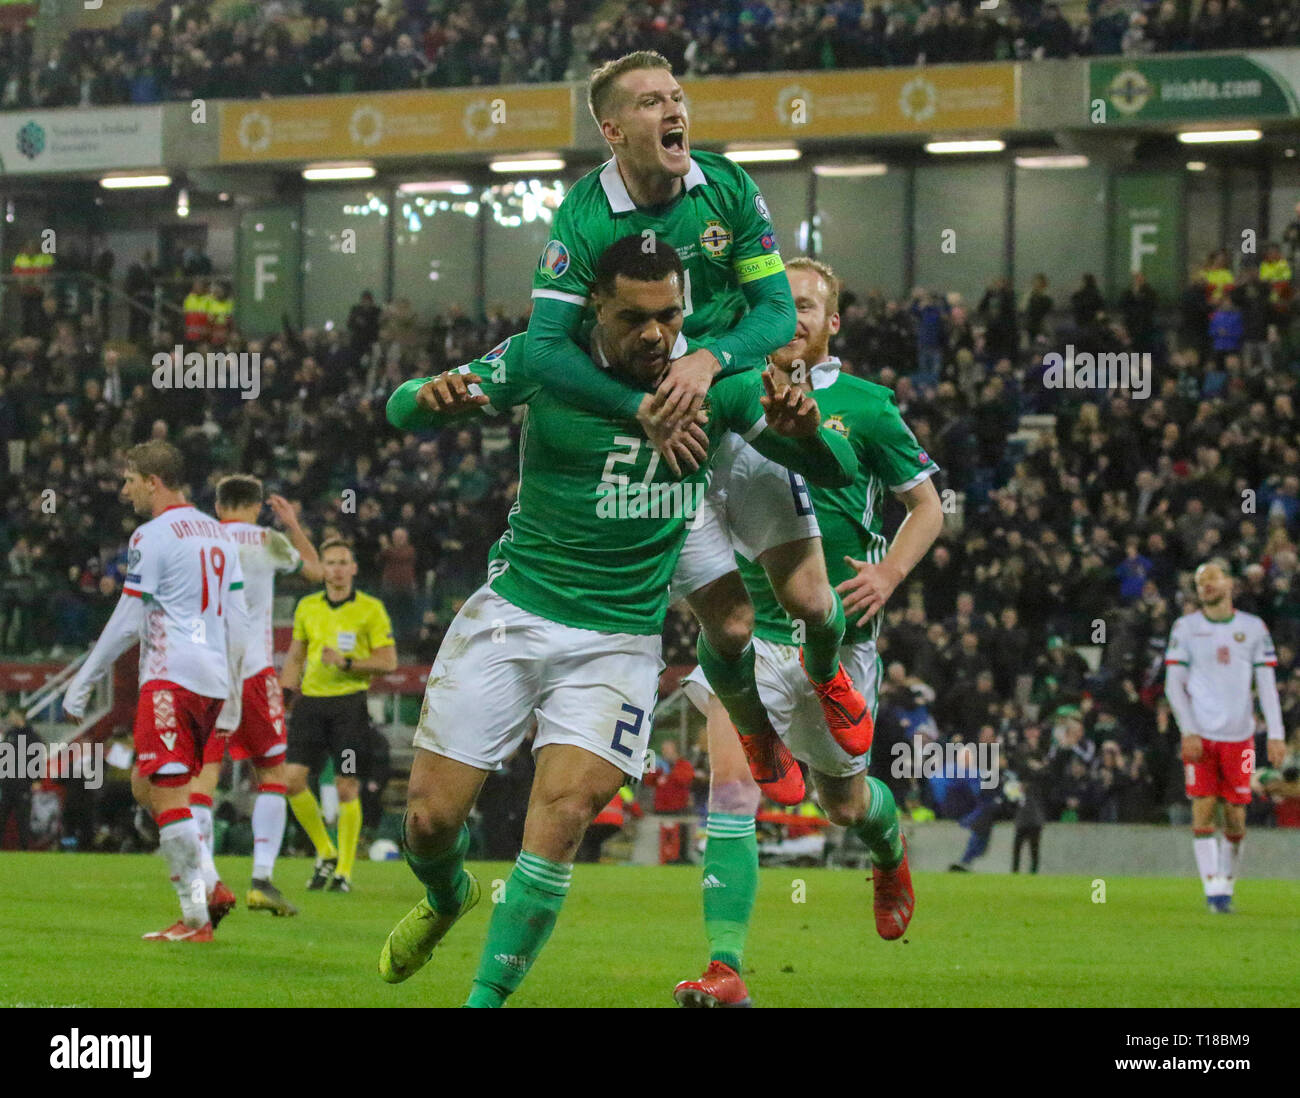 National Football Stadium at Windsor Park, Belfast, Northern Ireland. 24 March 2019. UEFA EURO 2020 Qualifier- Northern Ireland v Belarus. Action from tonight's game. Josh Magennis  (21) celebrates his winner for Northern Ireland with Steven Davis (8) and Liam Boyce (9). Credit: David Hunter/Alamy Live News. Stock Photo